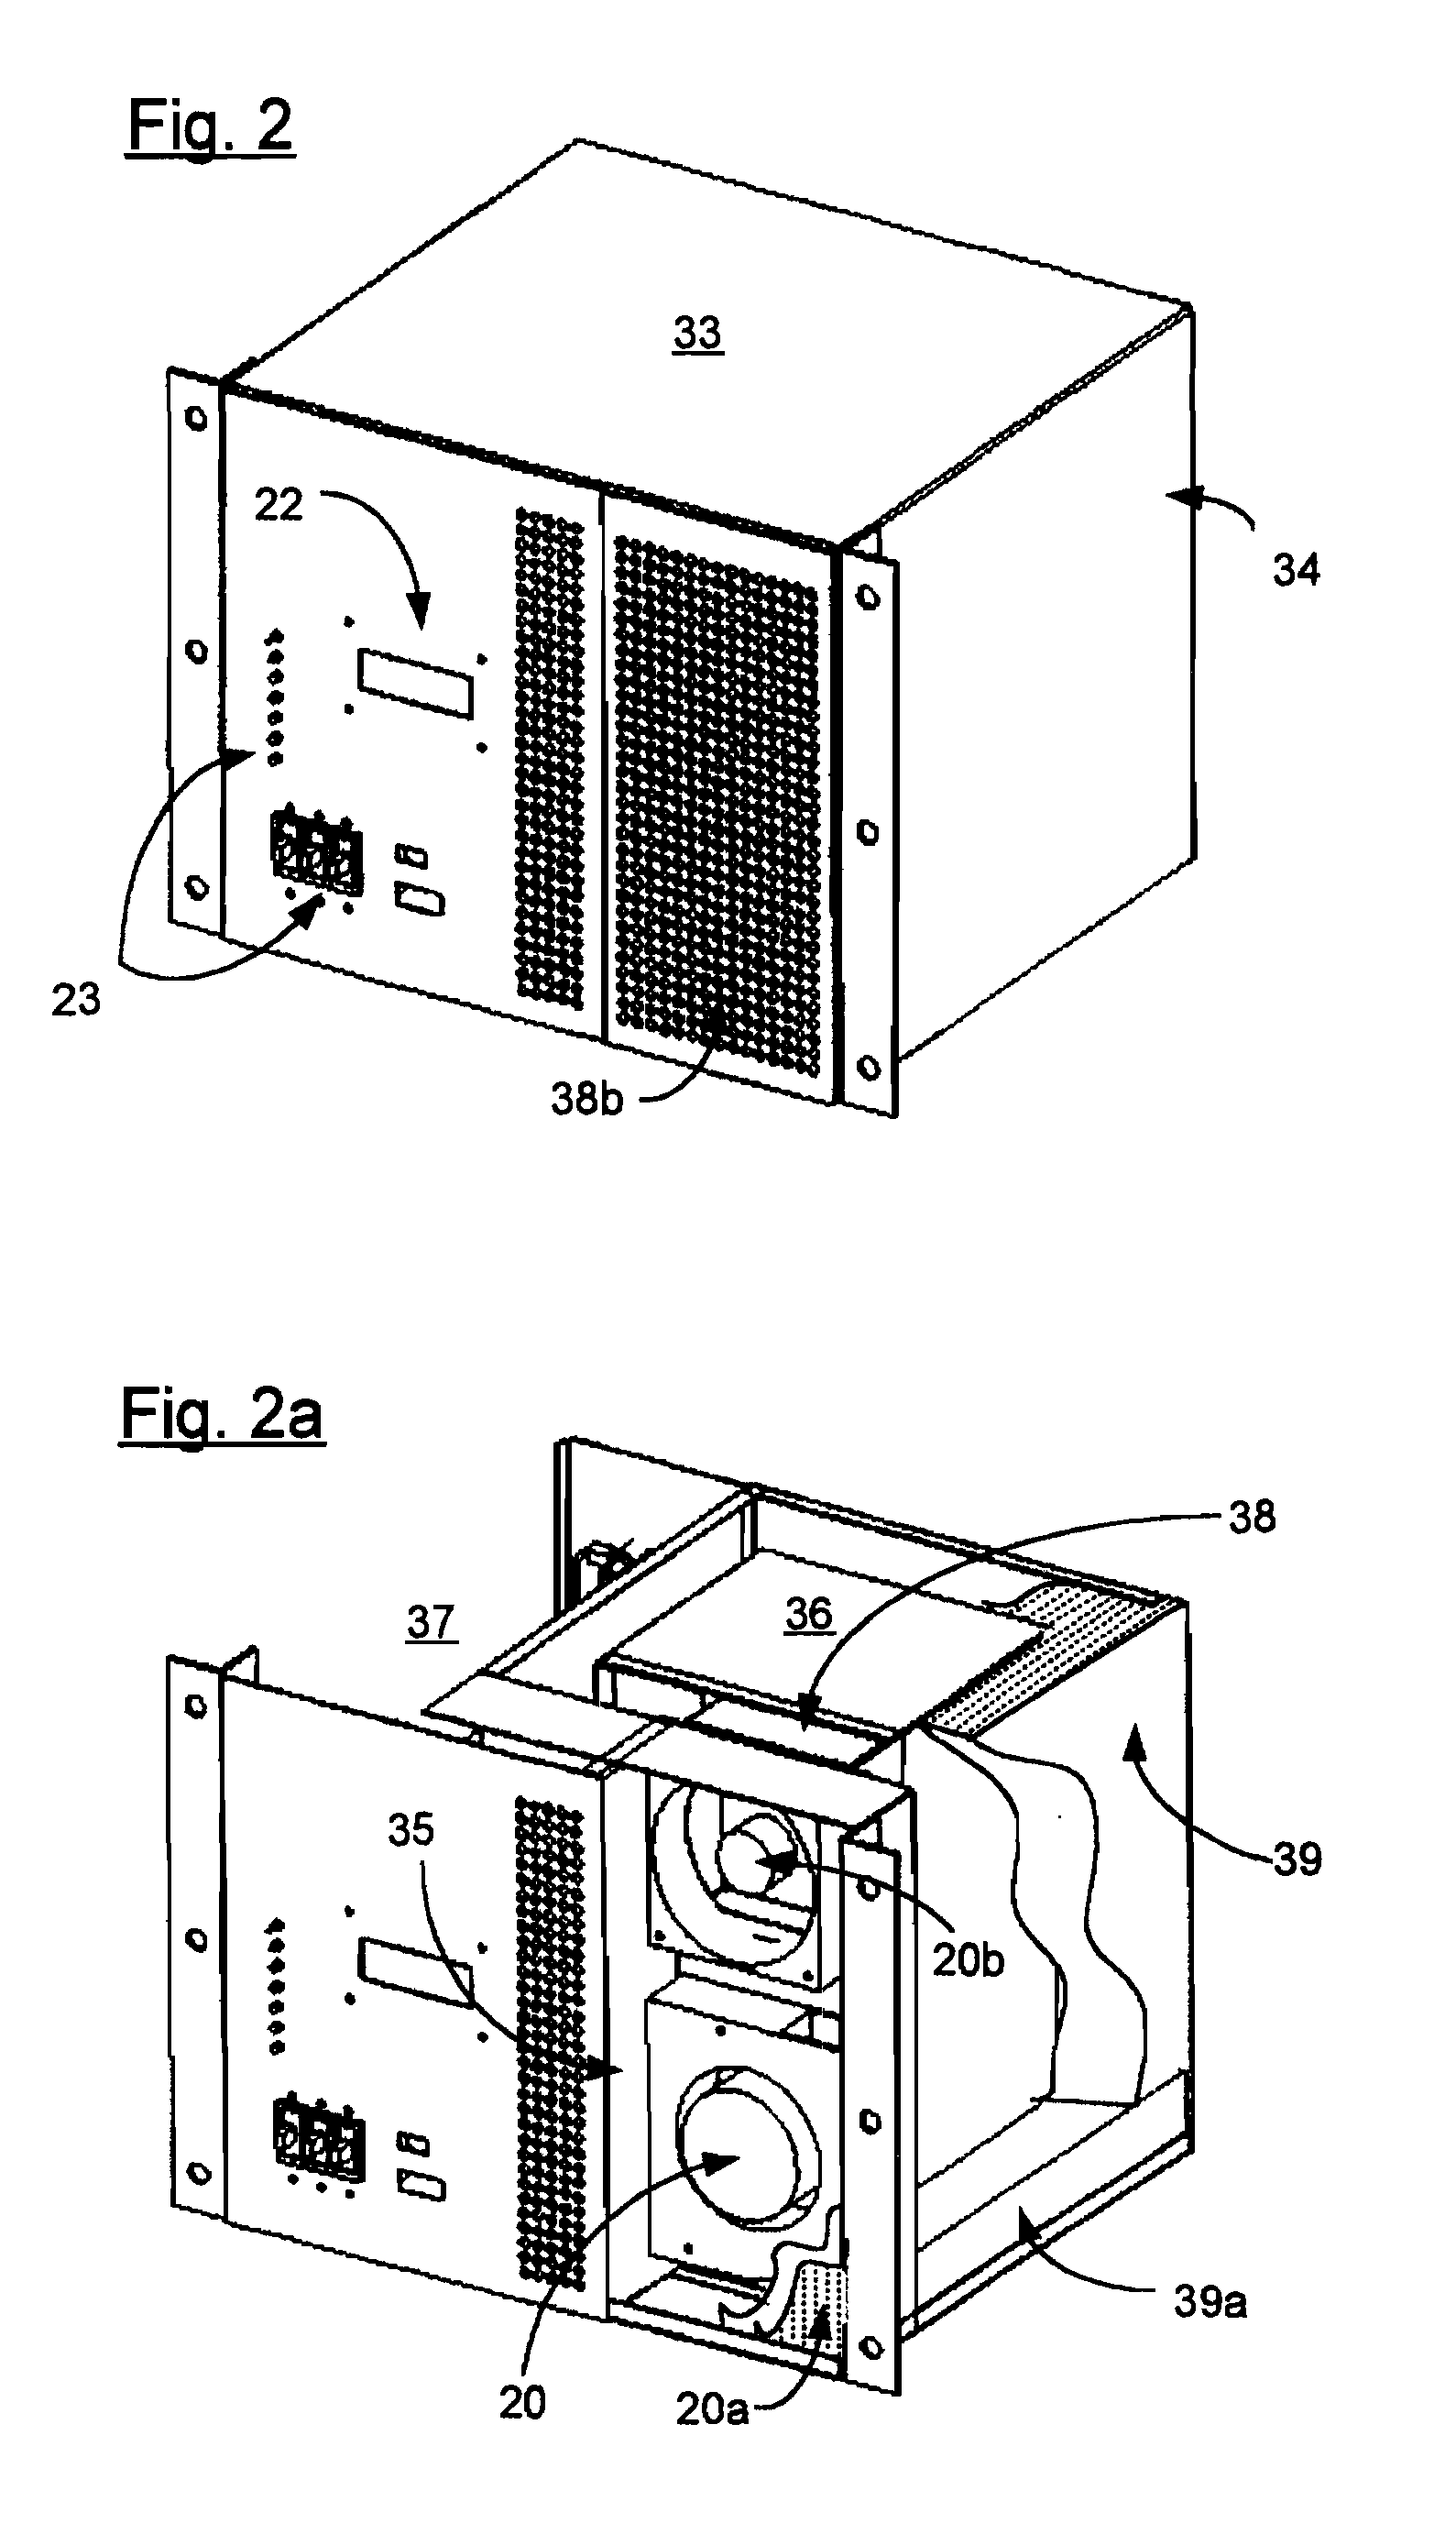 Reforming and Hydrogen Purification System